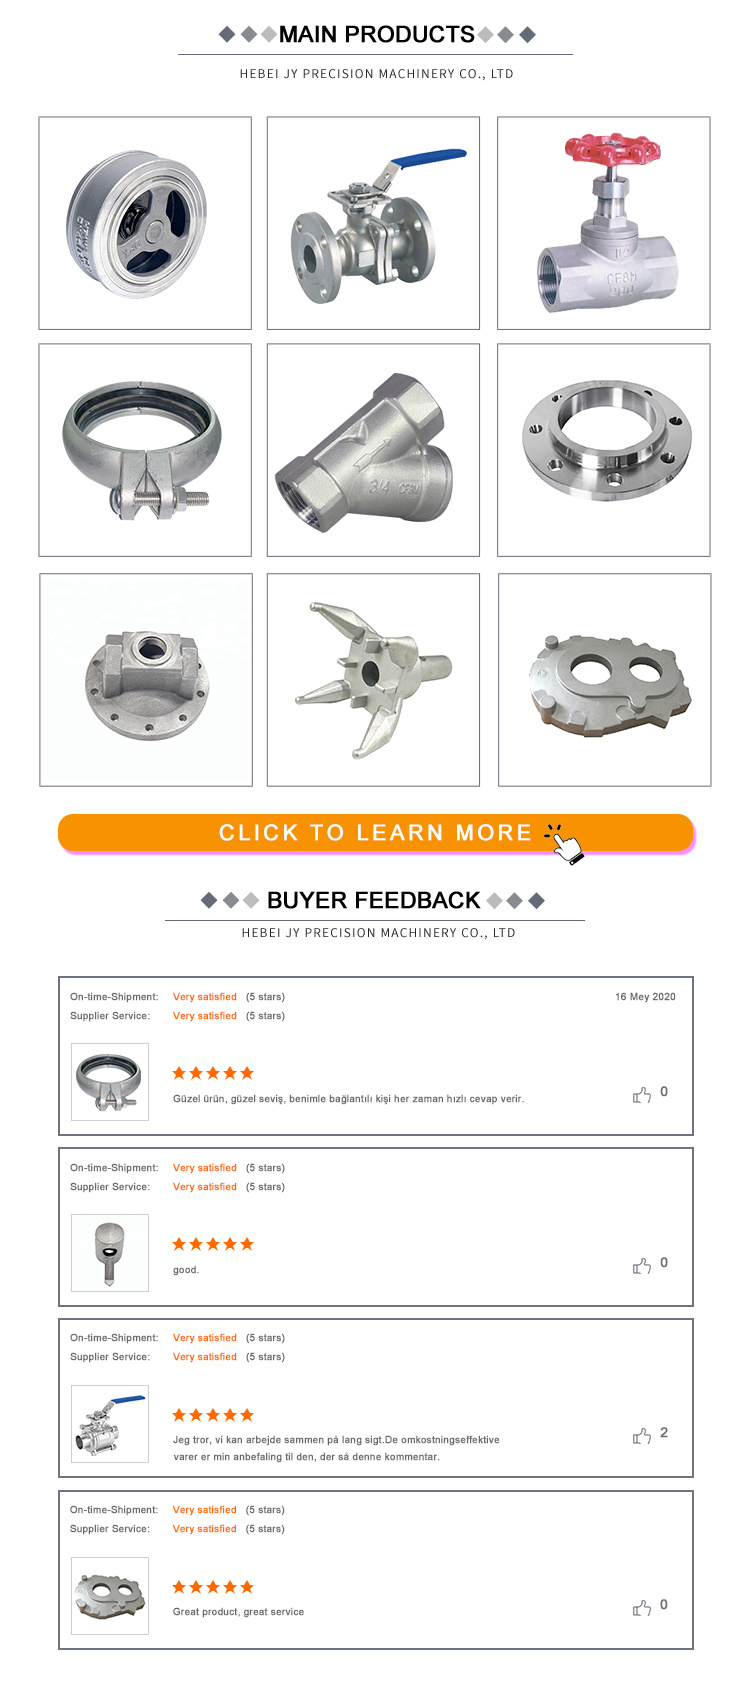 Transmission Parts Stainless Casting Investment Casting Lost Wax Casting Auto Engine Parts